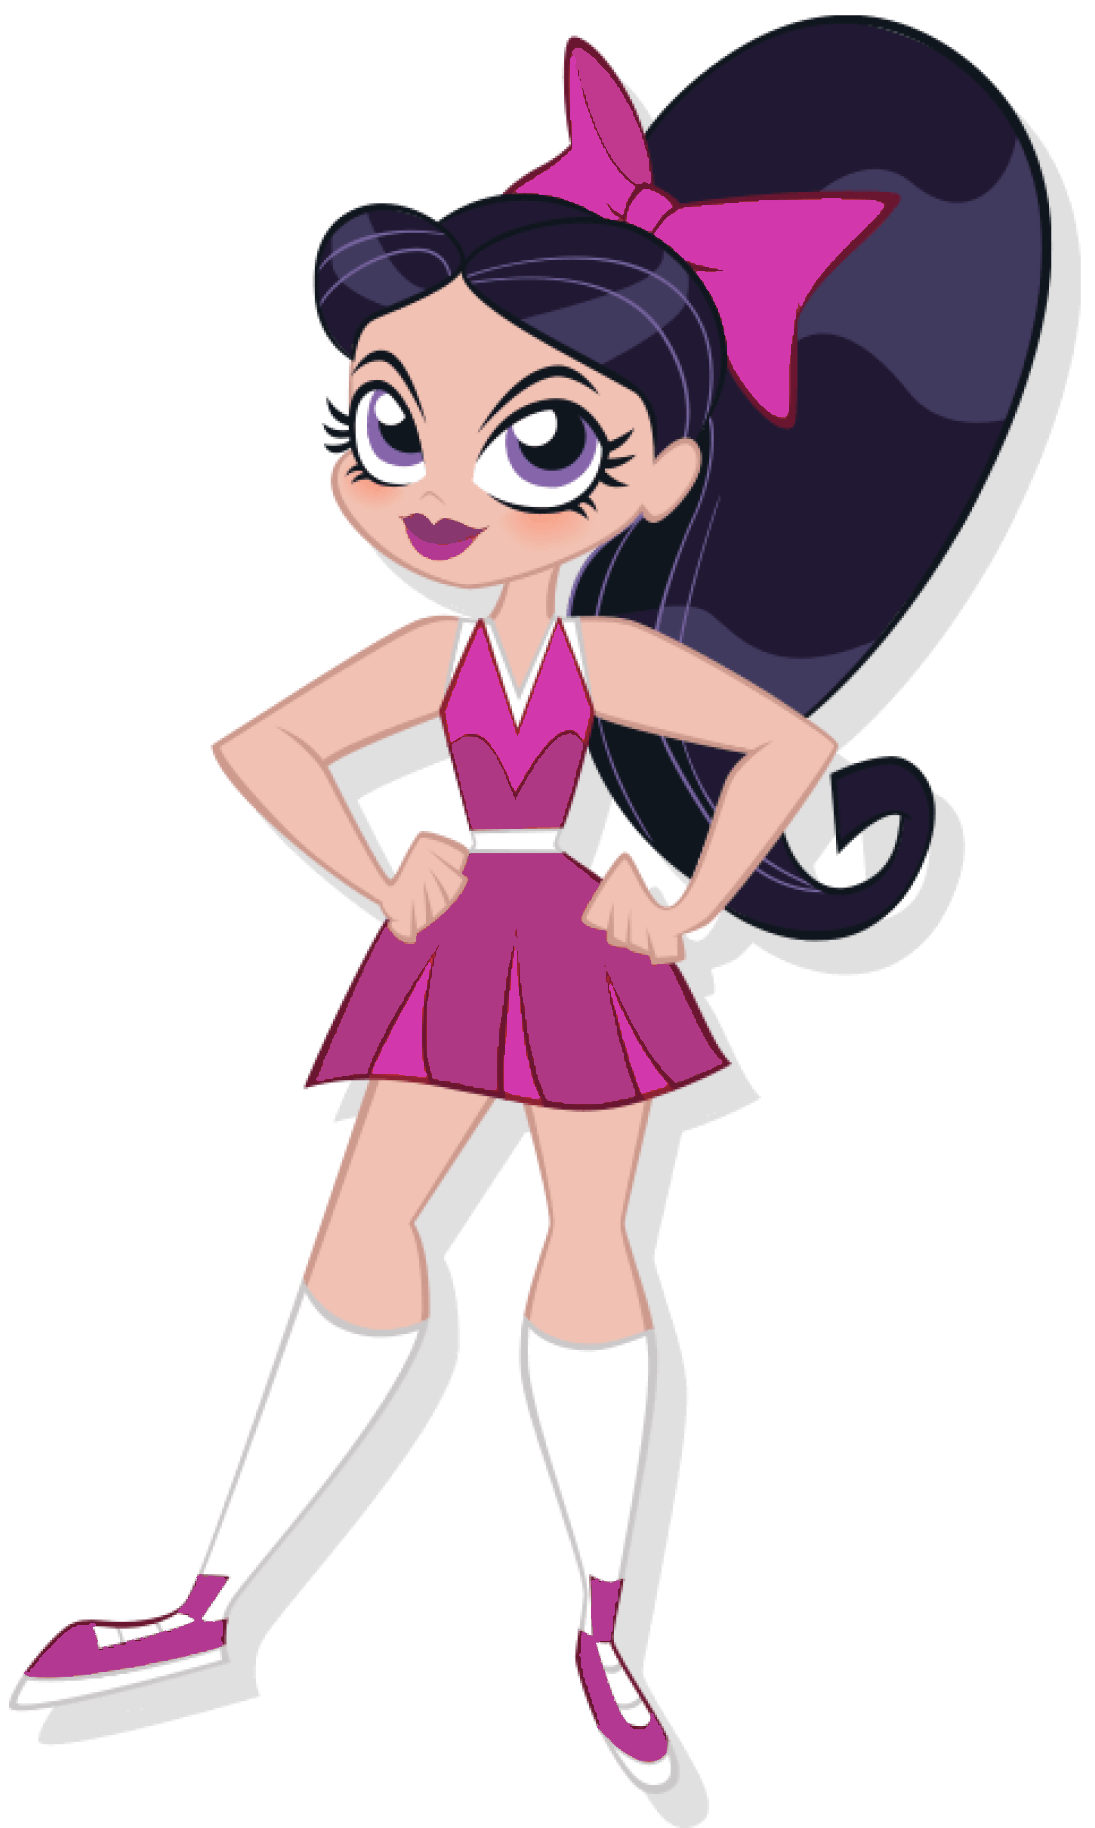 https://static.wikia.nocookie.net/dc-superherogirls/images/7/78/Carol_Ferris_in_Pink_2019_%28G2%29.png/revision/latest?cb=20211106054752